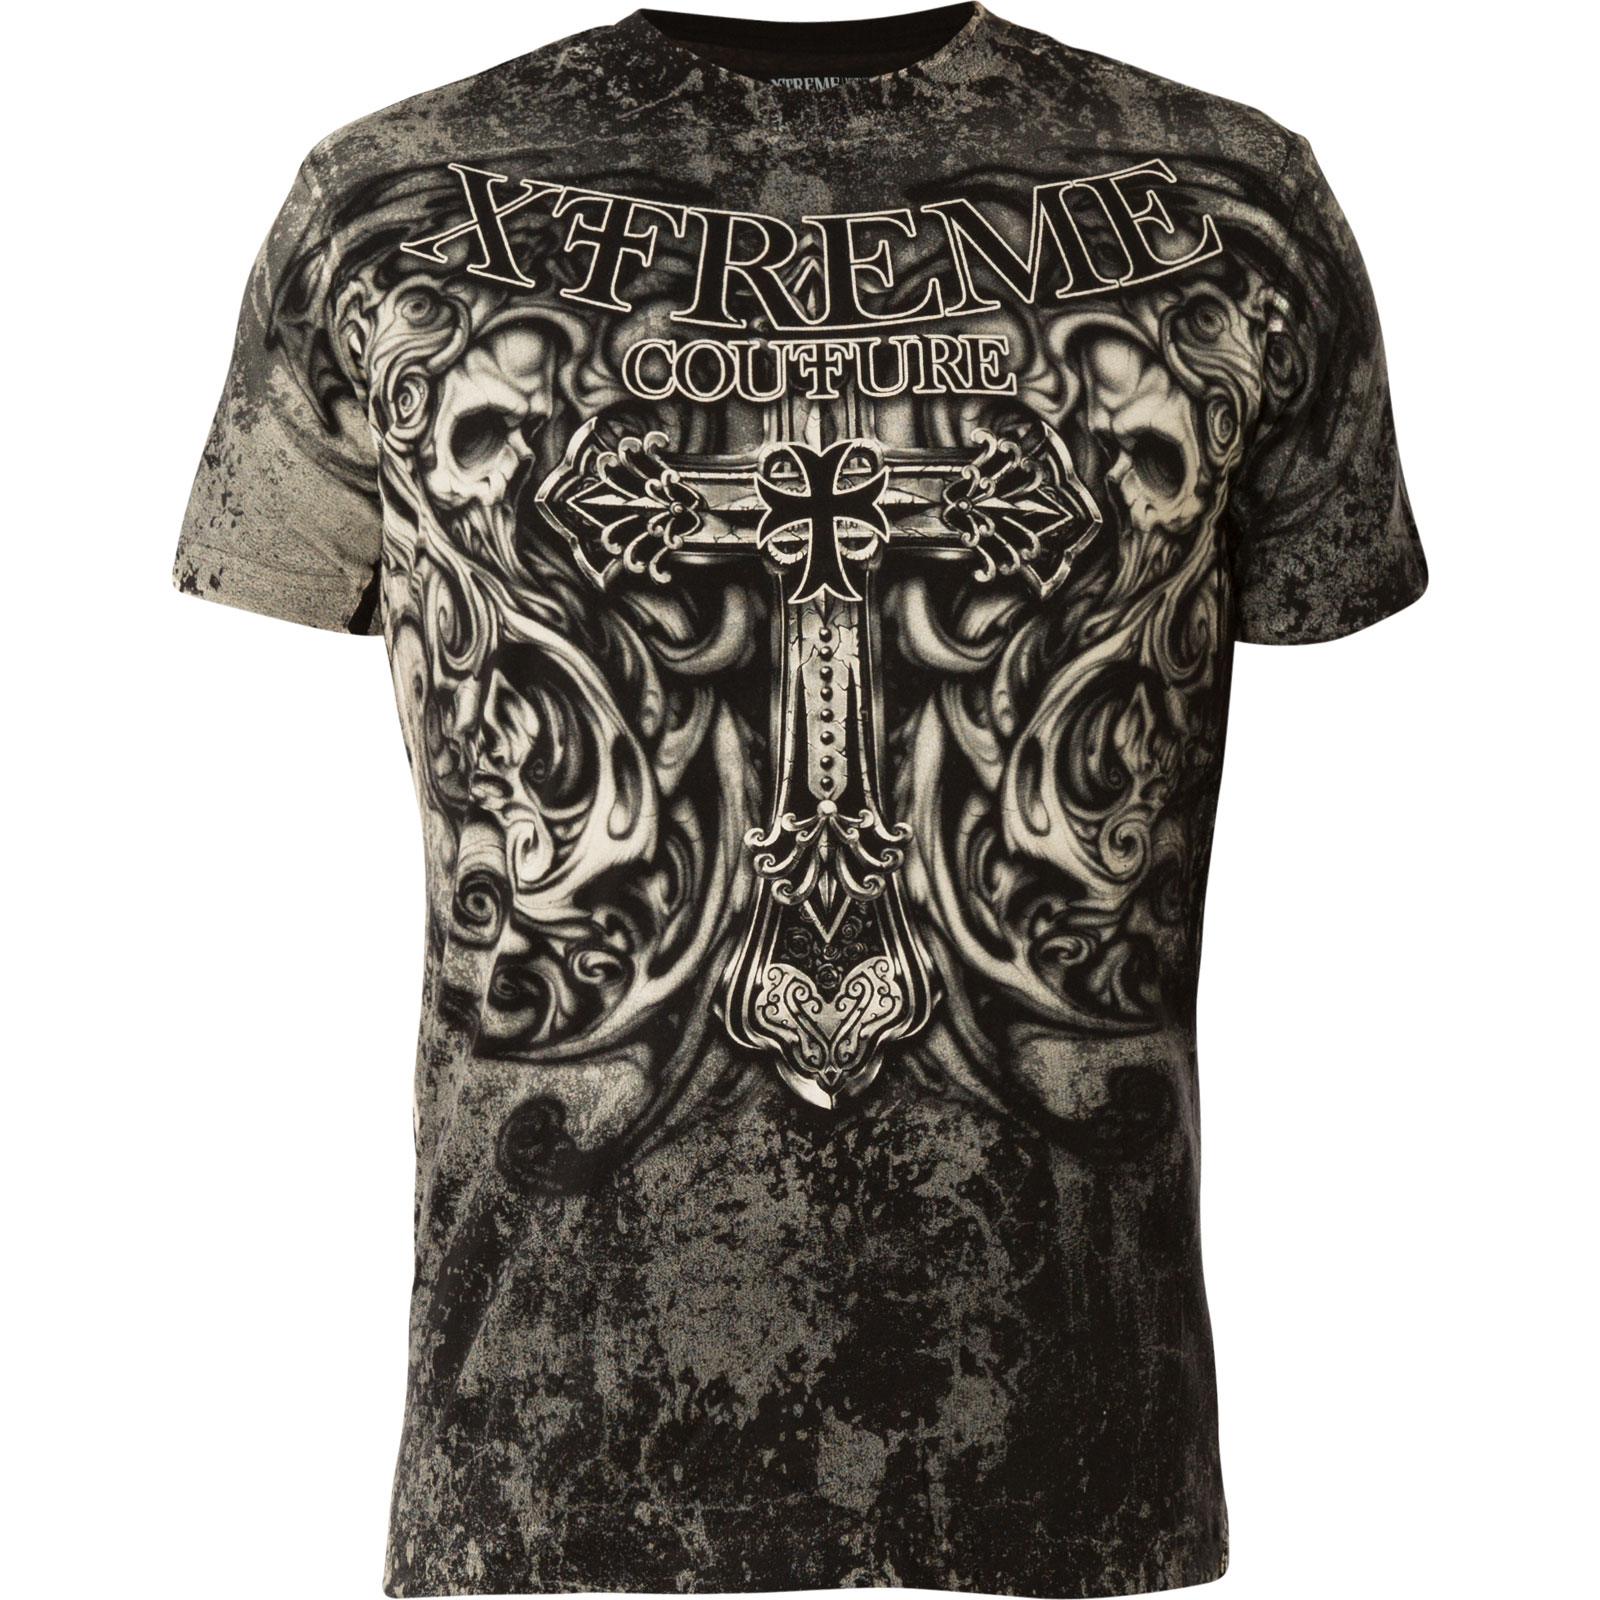 Xtreme Couture T- Shirt Hades with a large cross and skulls